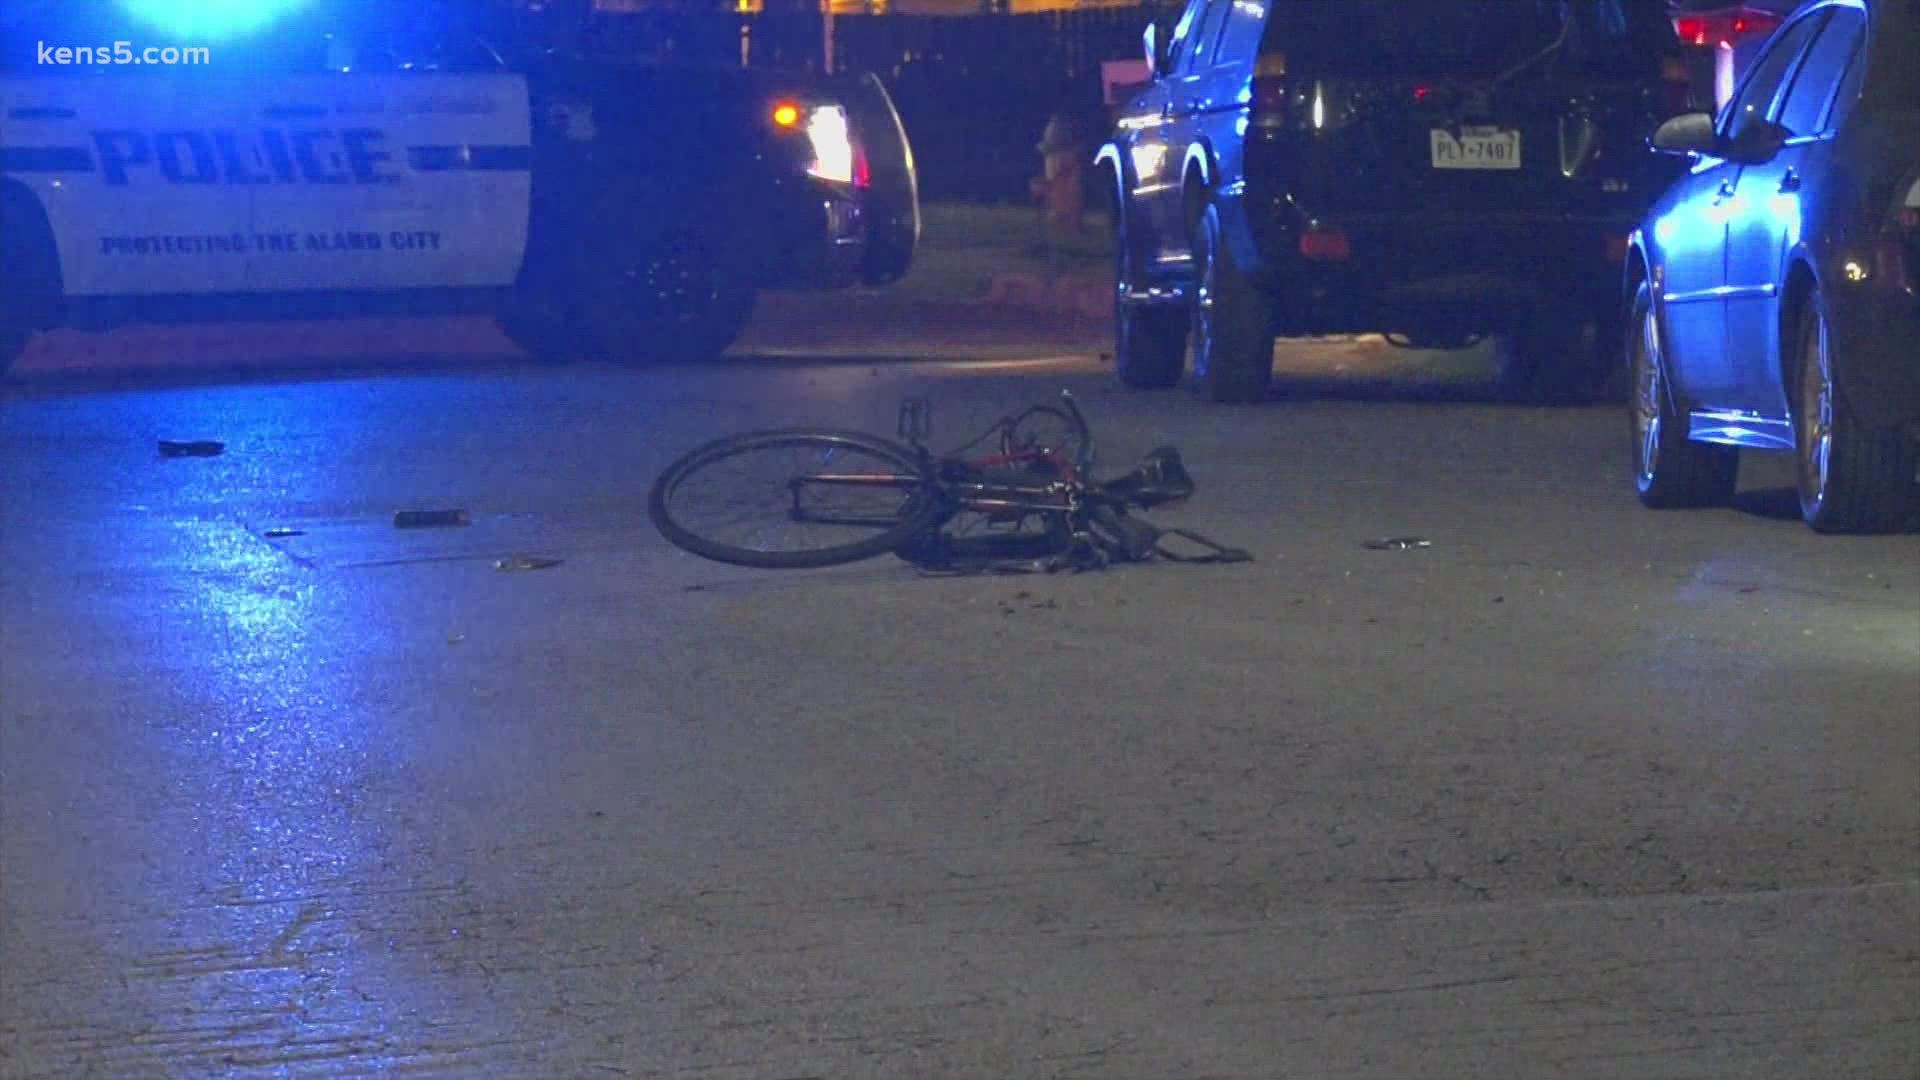 The cyclist was taken to a local hospital in serious condition.